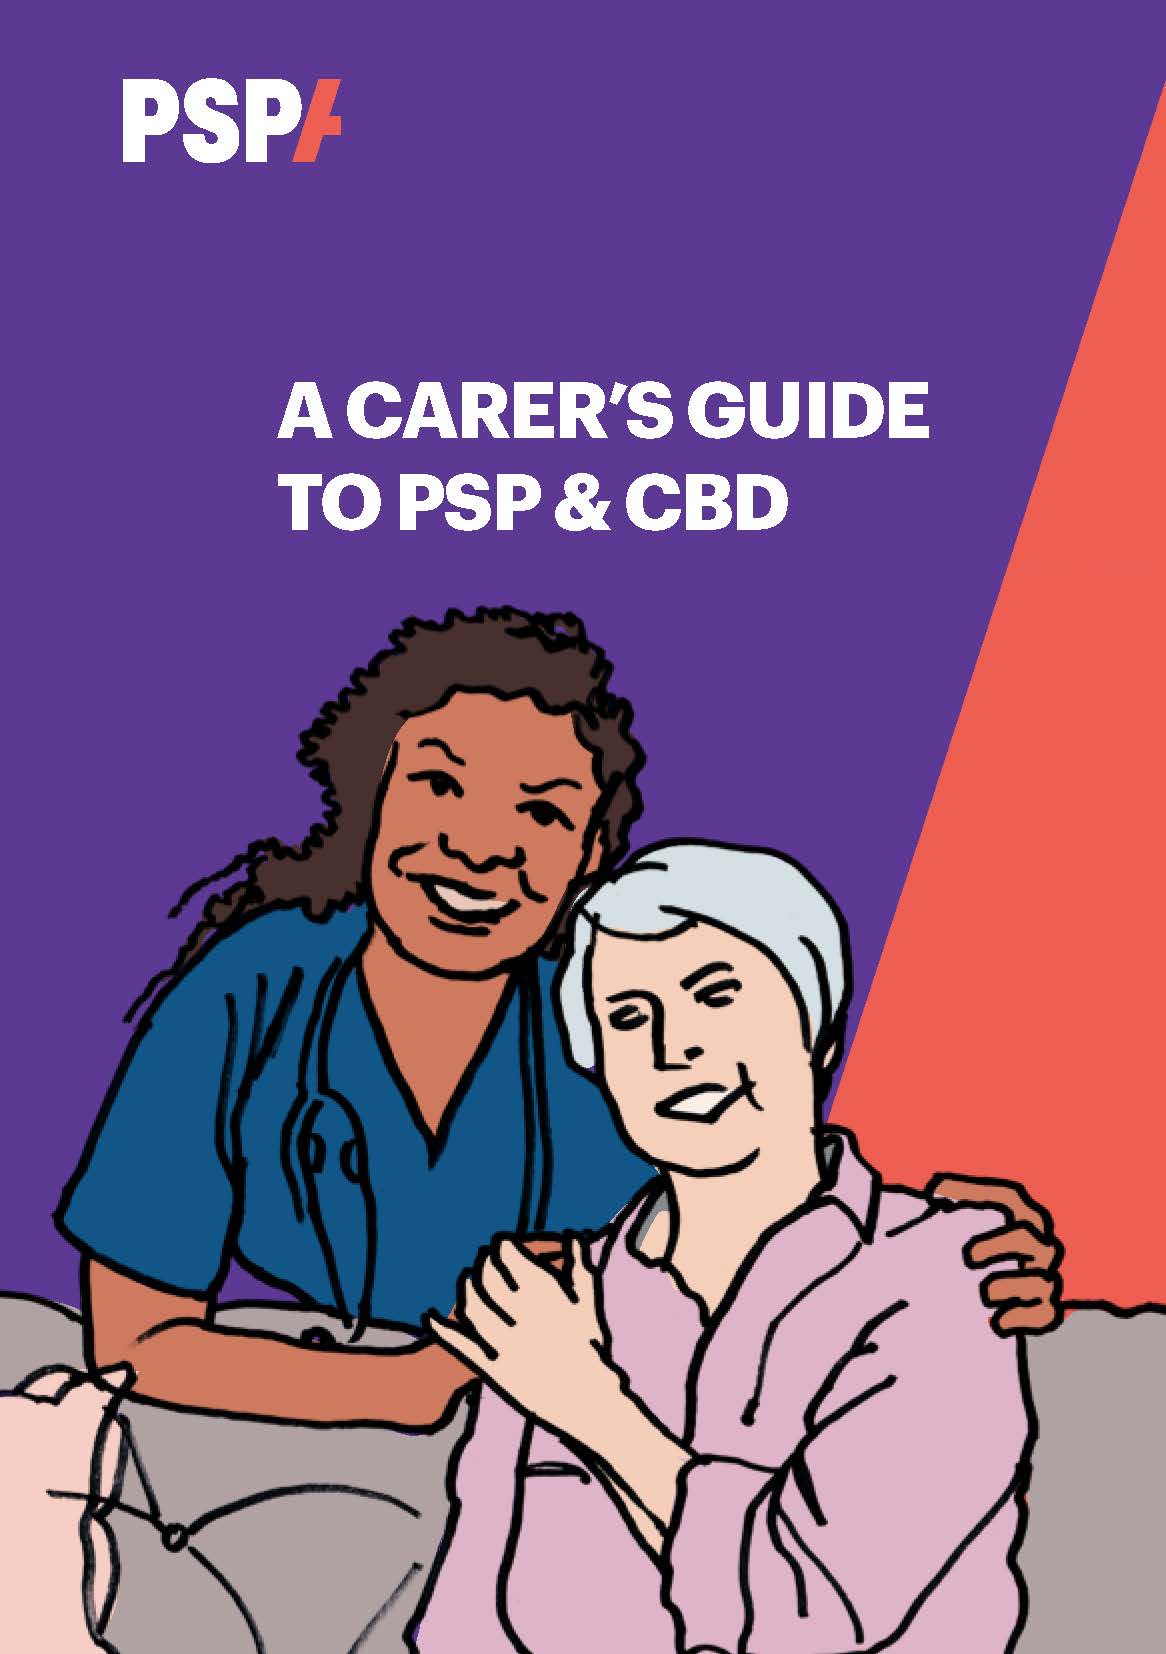 Carers Guide now available